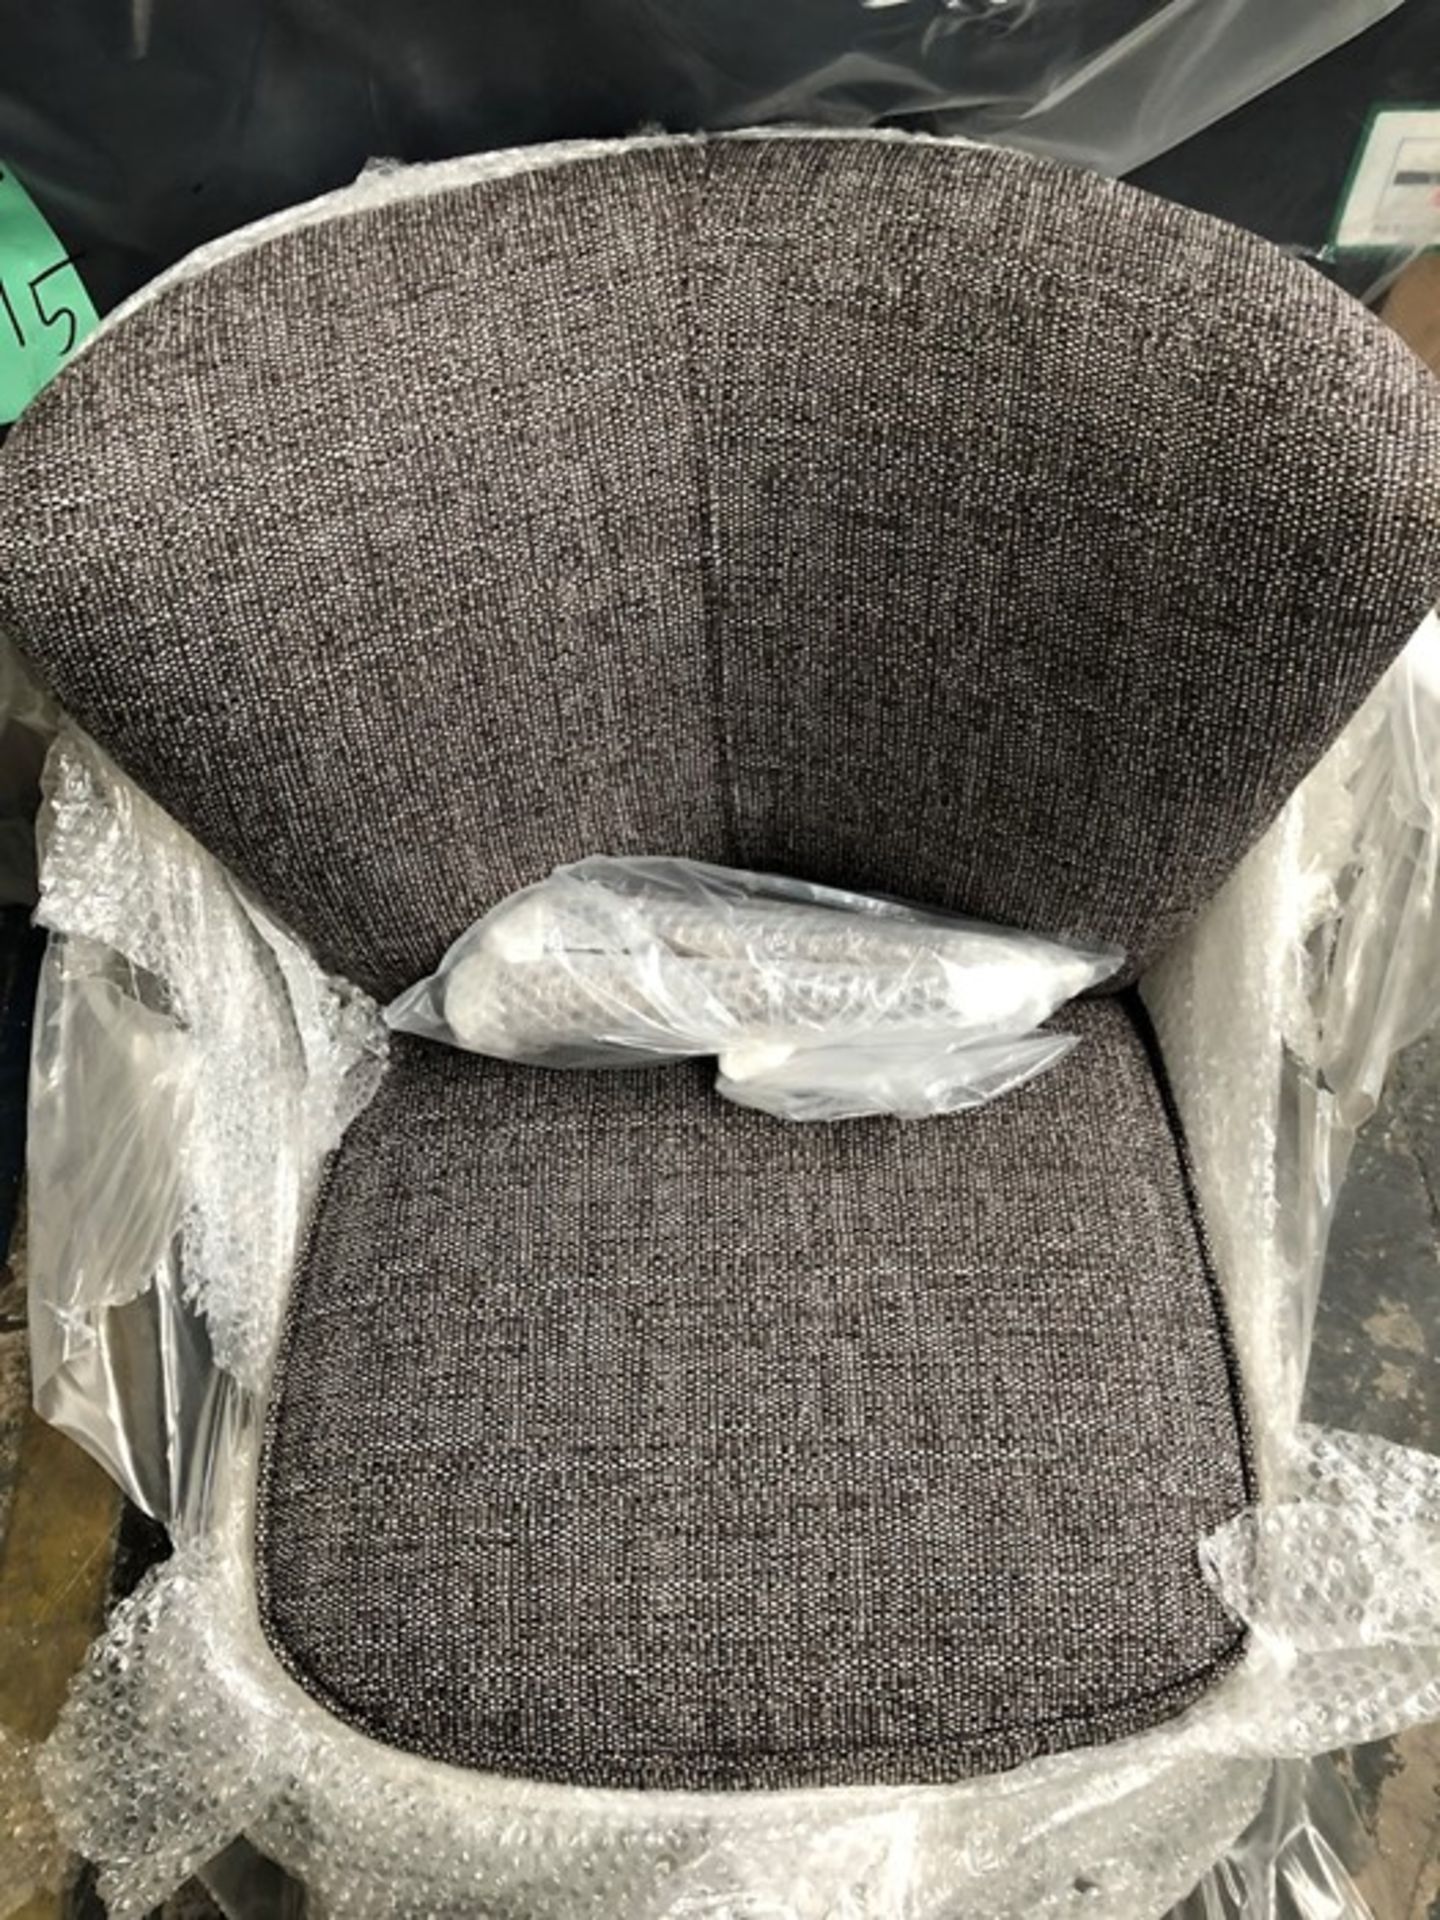 1 BRAND NEW BAGGED FABB SOFAS LIZZIE TUB CHAIR IN BARLEY GREY (VIEWING HIGHLY RECOMMENDED)